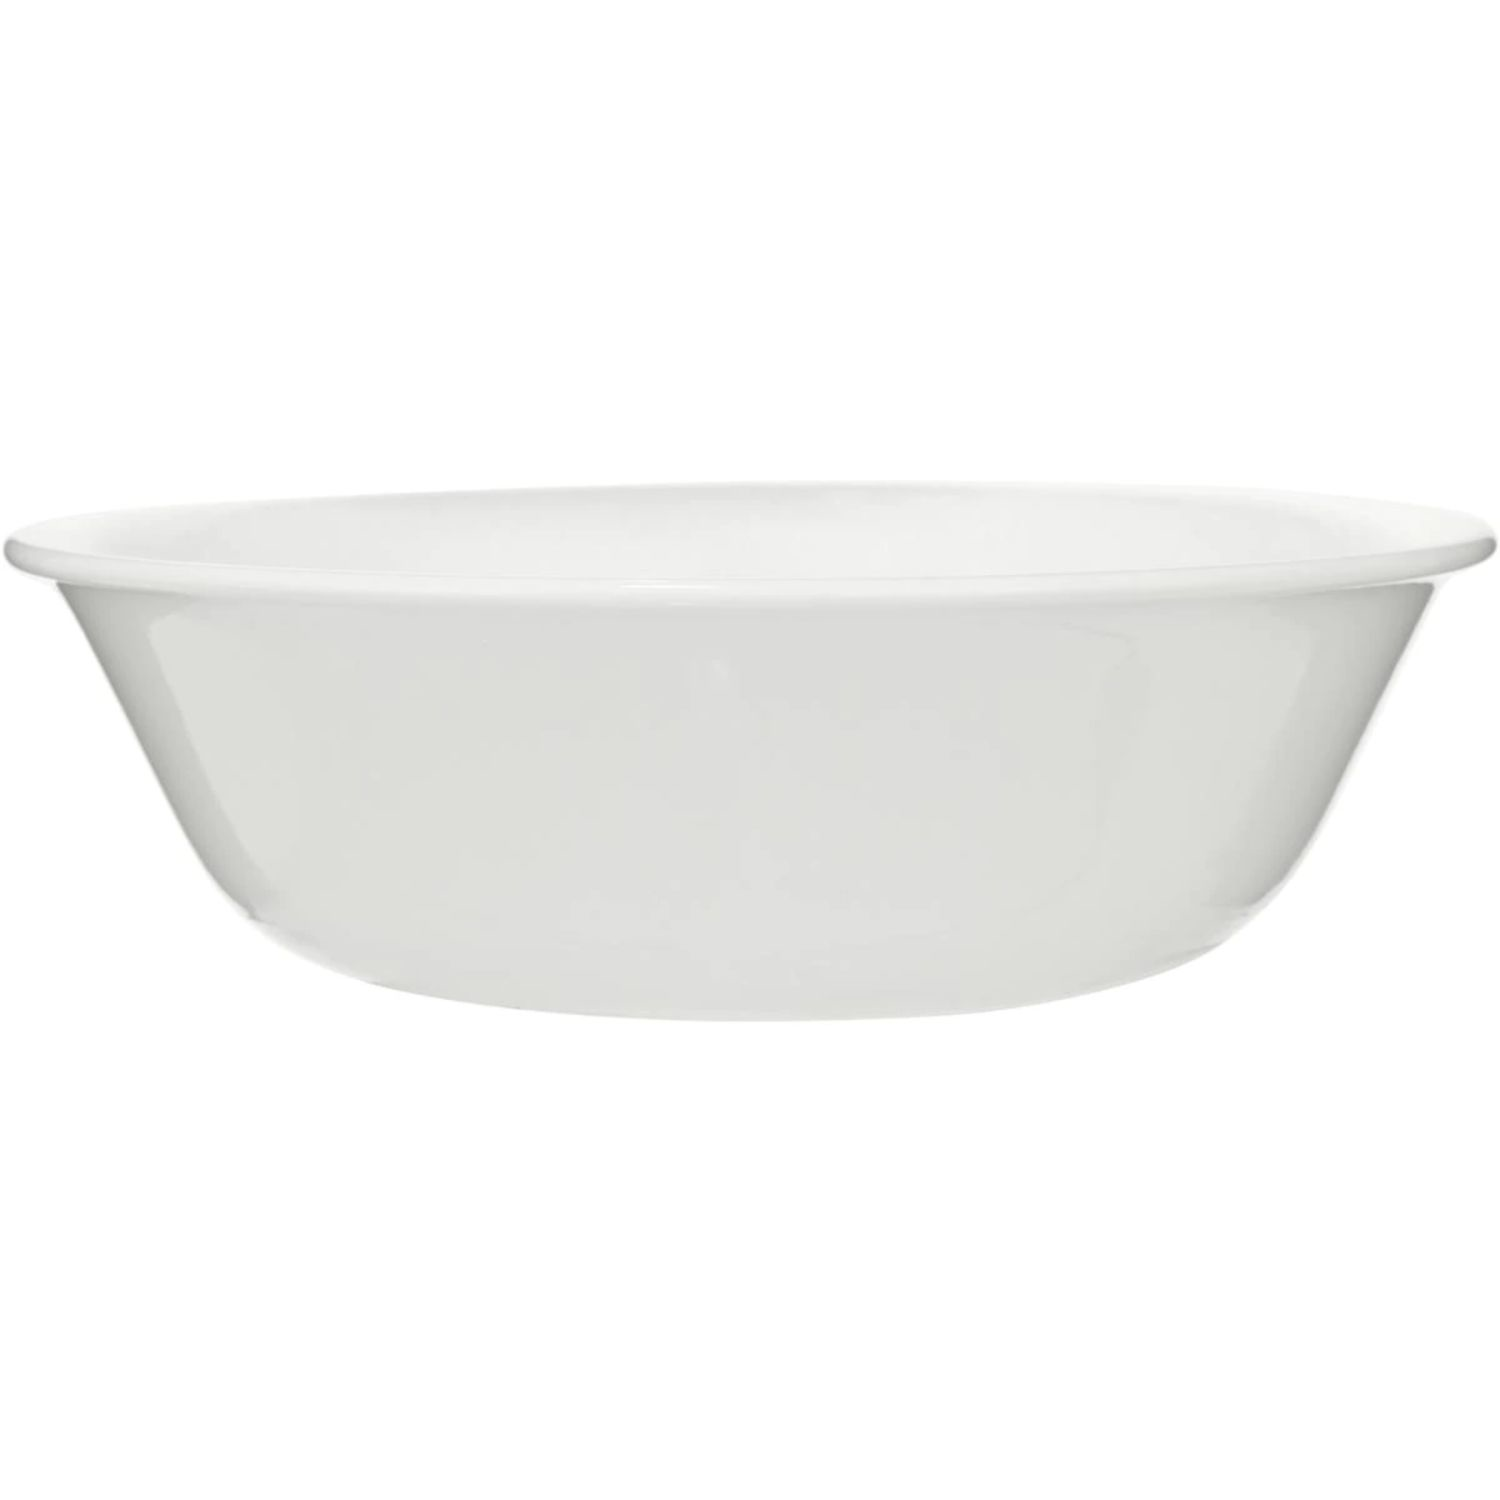 Corelle Winter Frost White Soup/Cereal Bowl, 1 Each